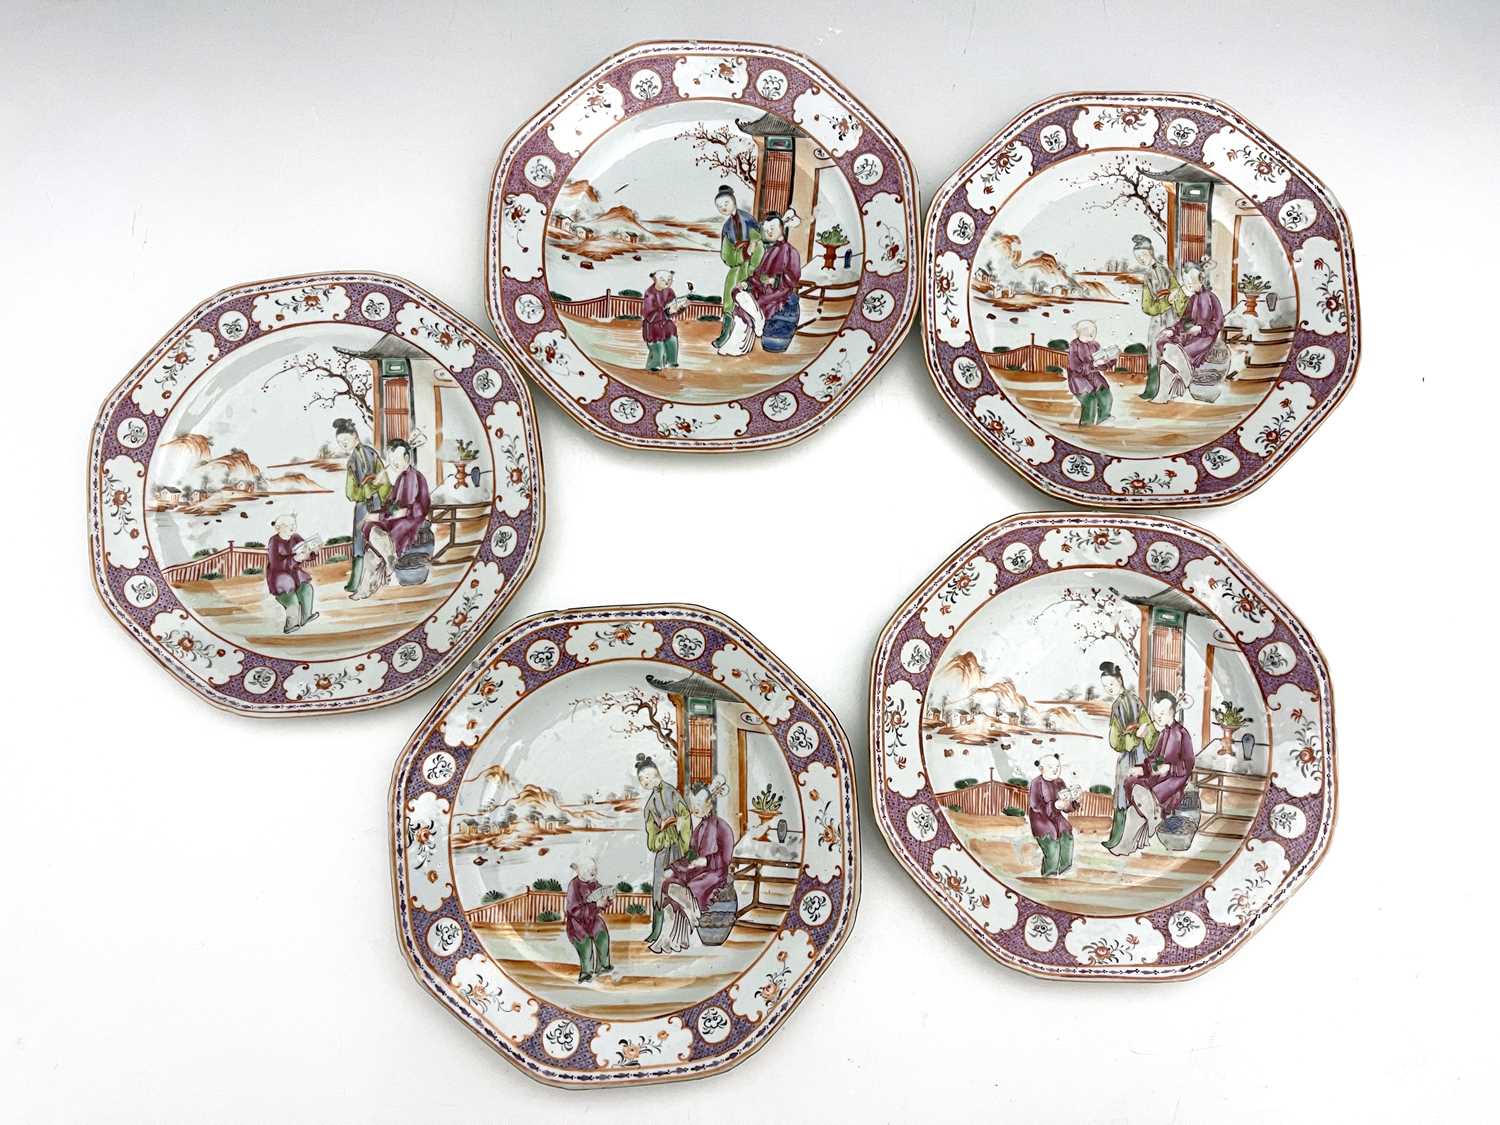 A set of five Chinese famille rose plates, 18th century, octagonal form, painted in the Cantonese